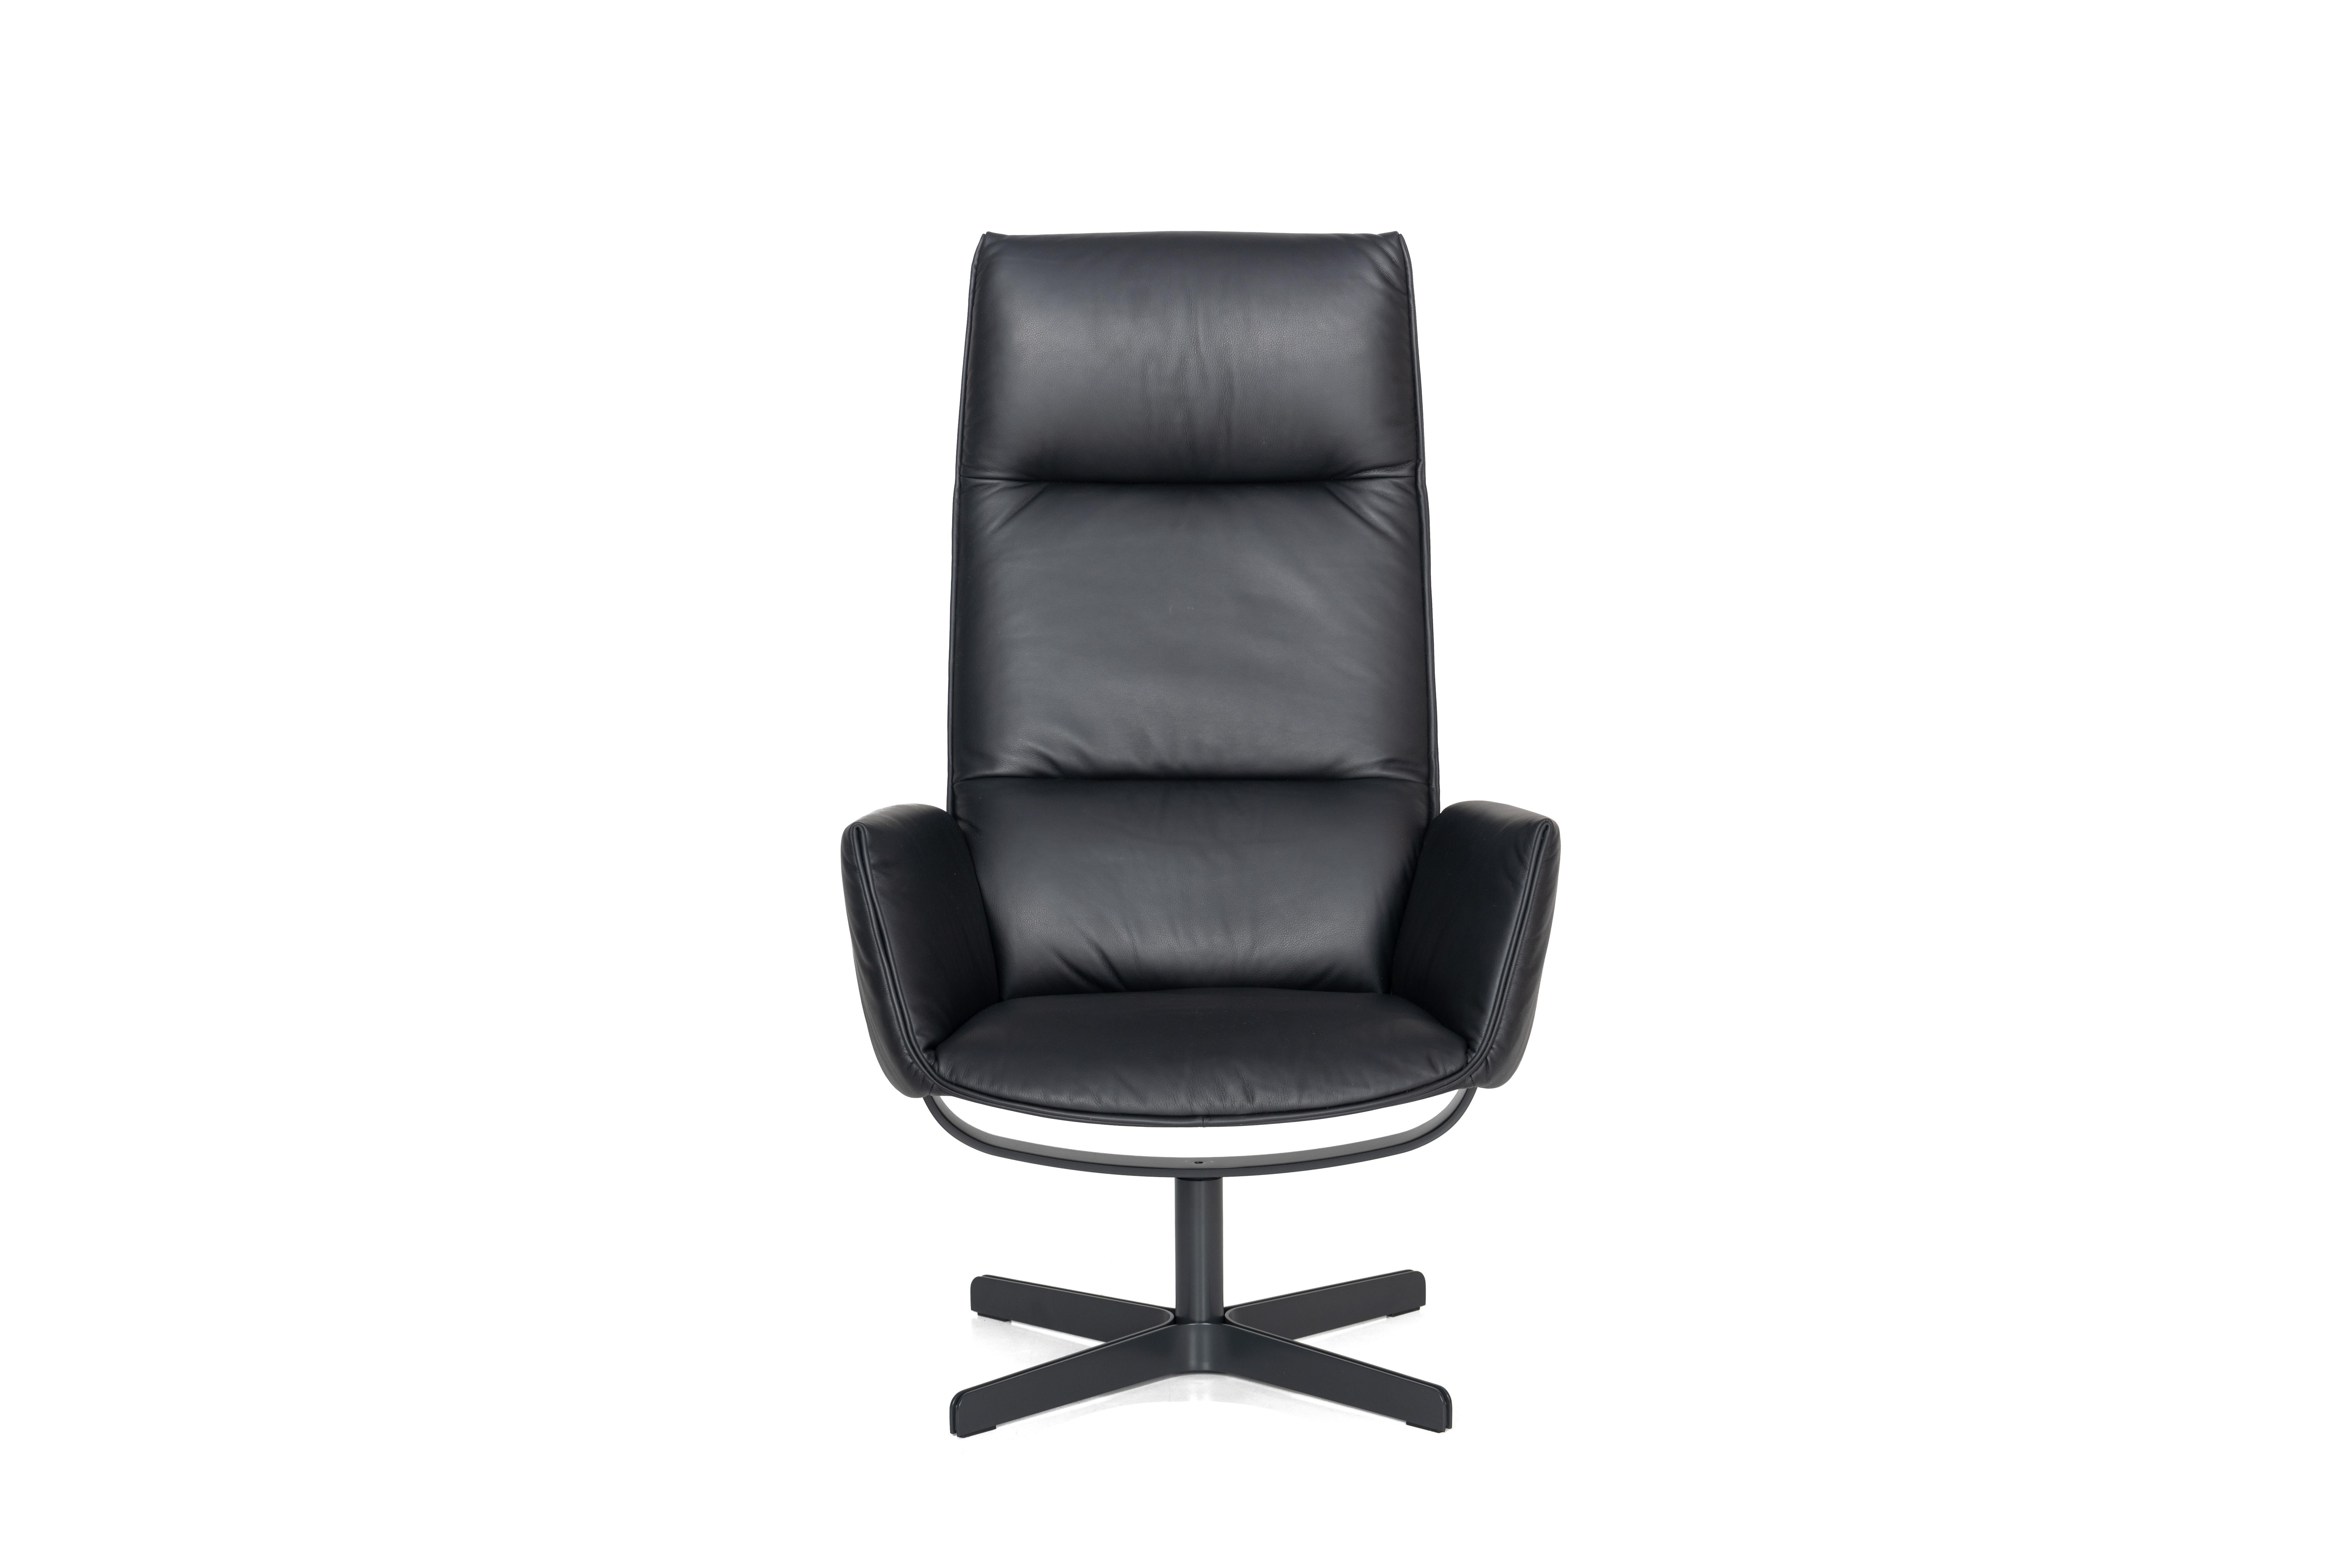 DS-344 armchair by De Sede
Dimensions: D 46 x W 71 x H 117 cm, with extension W 101
Materials: steel, leather

Prices may change according to the chosen materials and size. 

The twin of DS-343

DS-344 is the twin of the armchair that